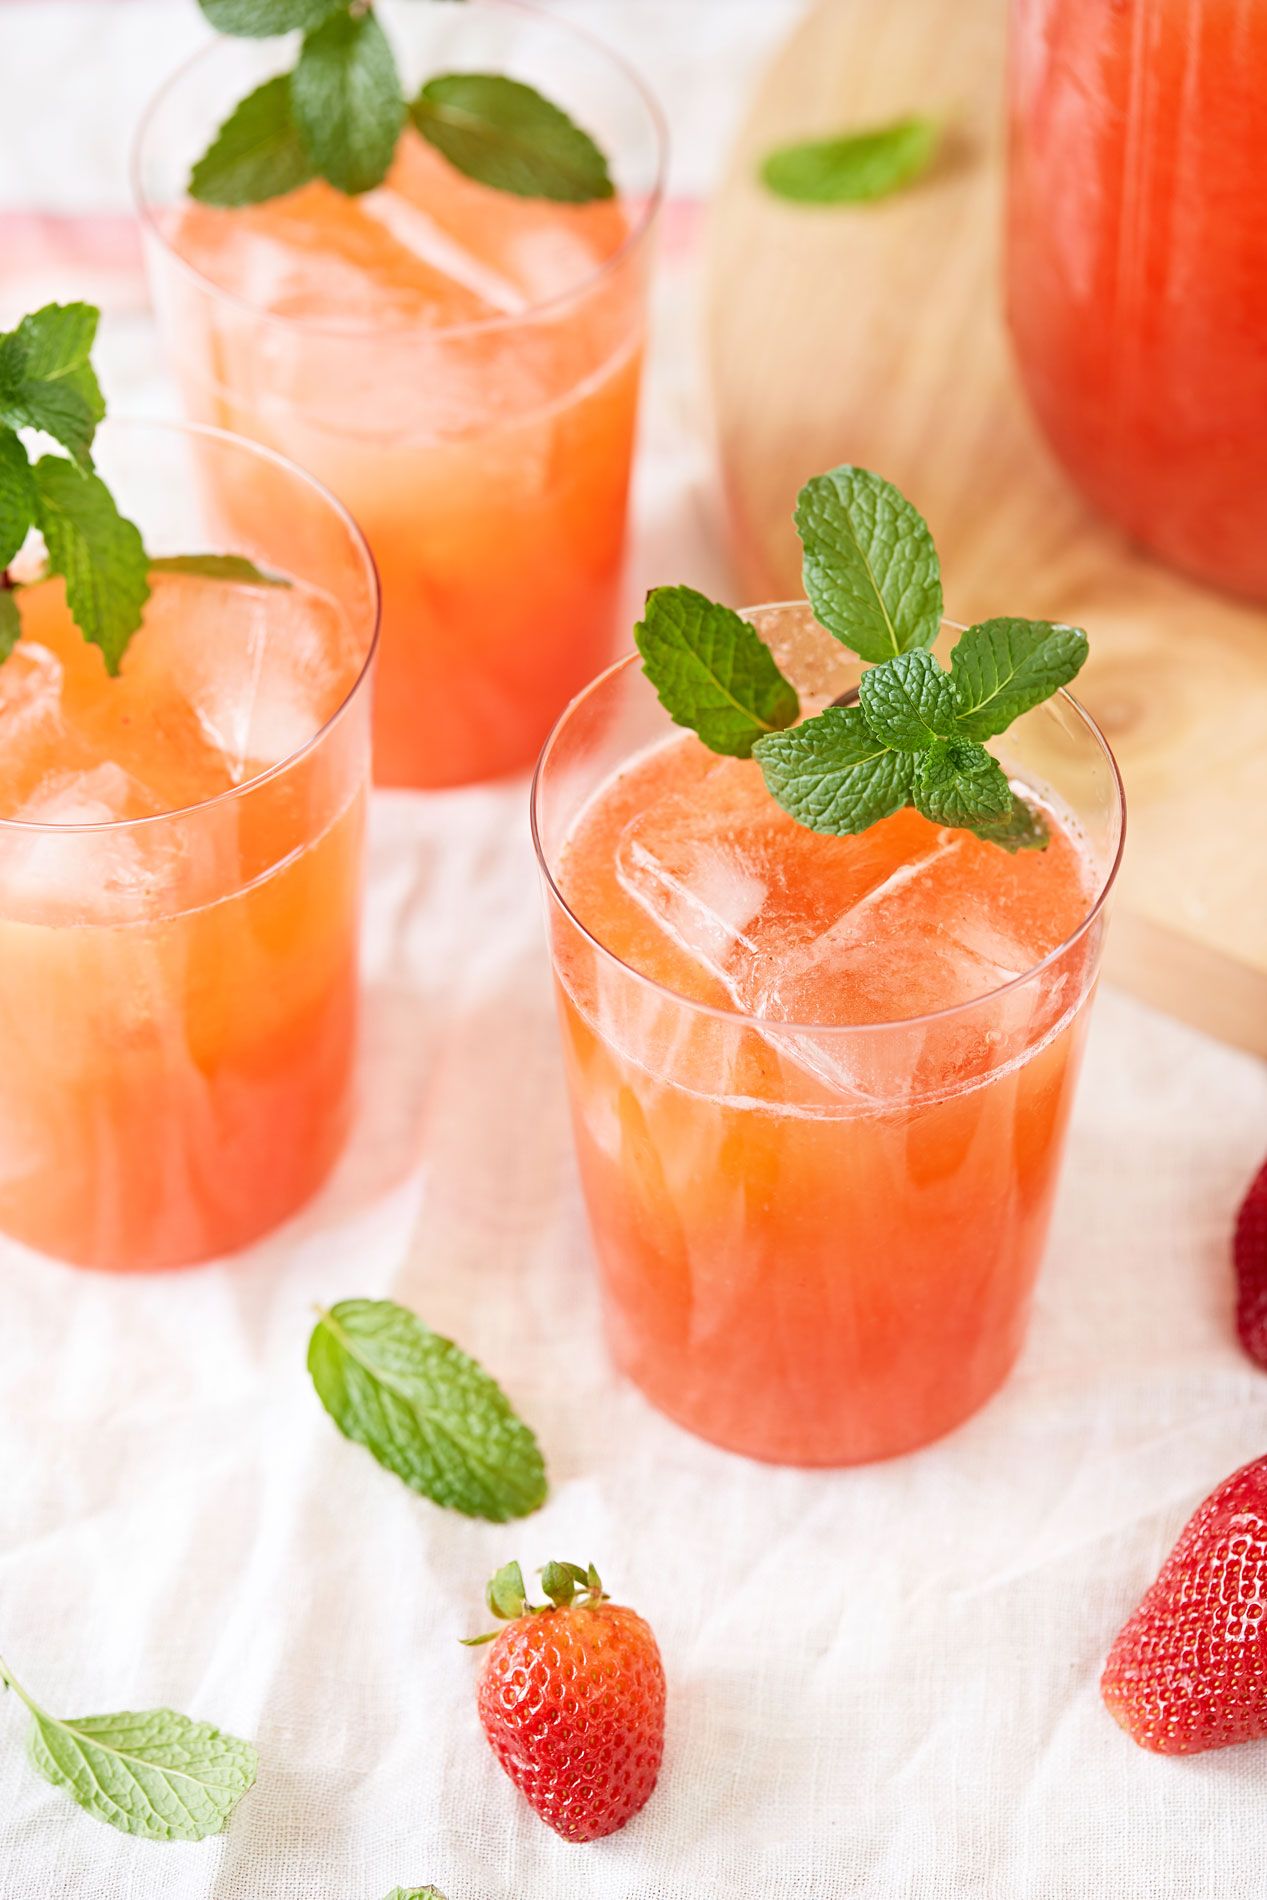 25+ Easy Non Alcoholic Party Drinks - Recipes For Alcohol-Free Summer Drinks